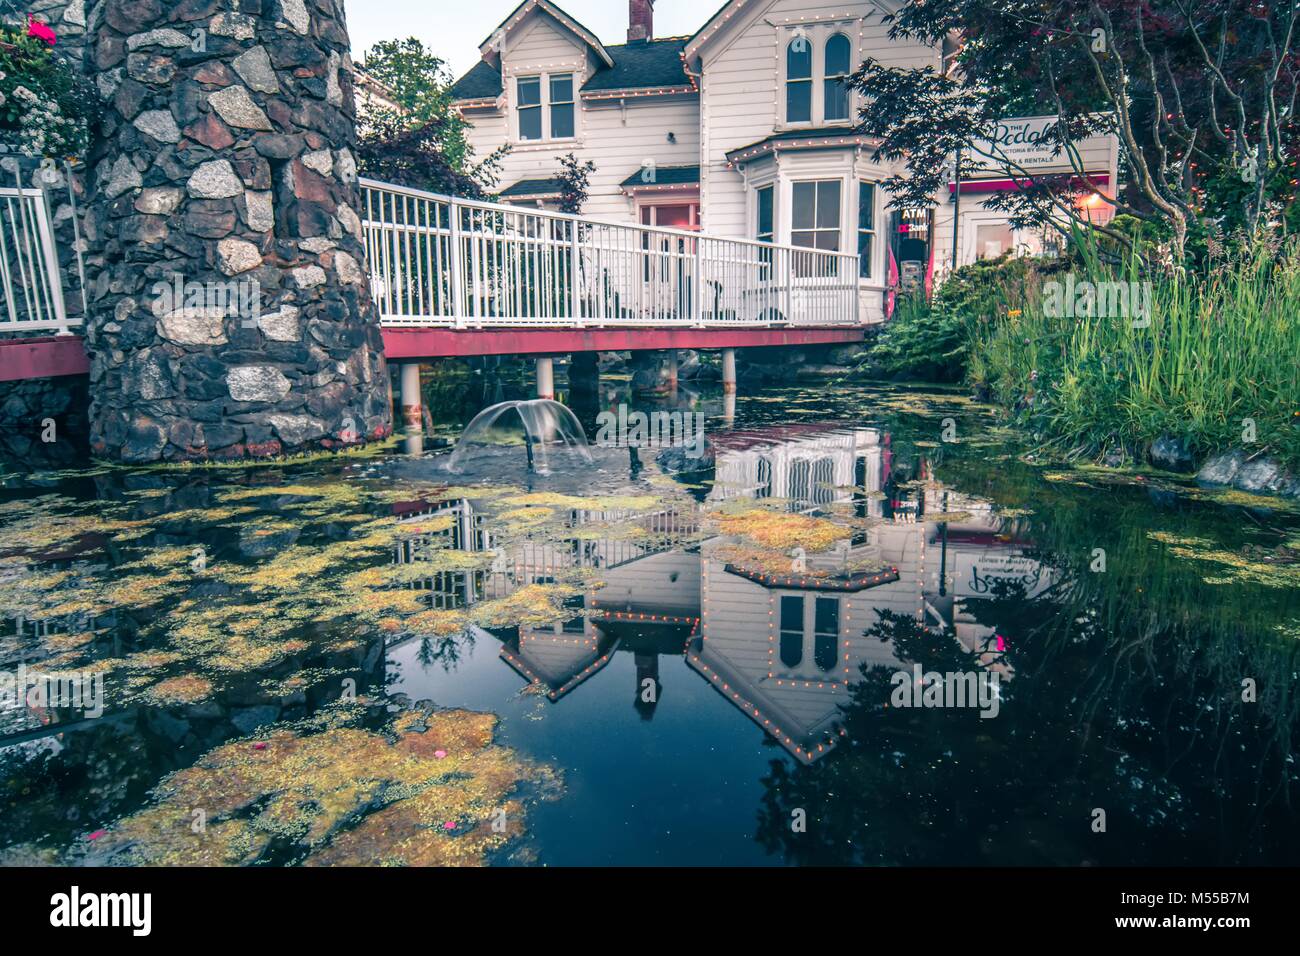 beautiful historic home details and nature pond with reflection Stock Photo